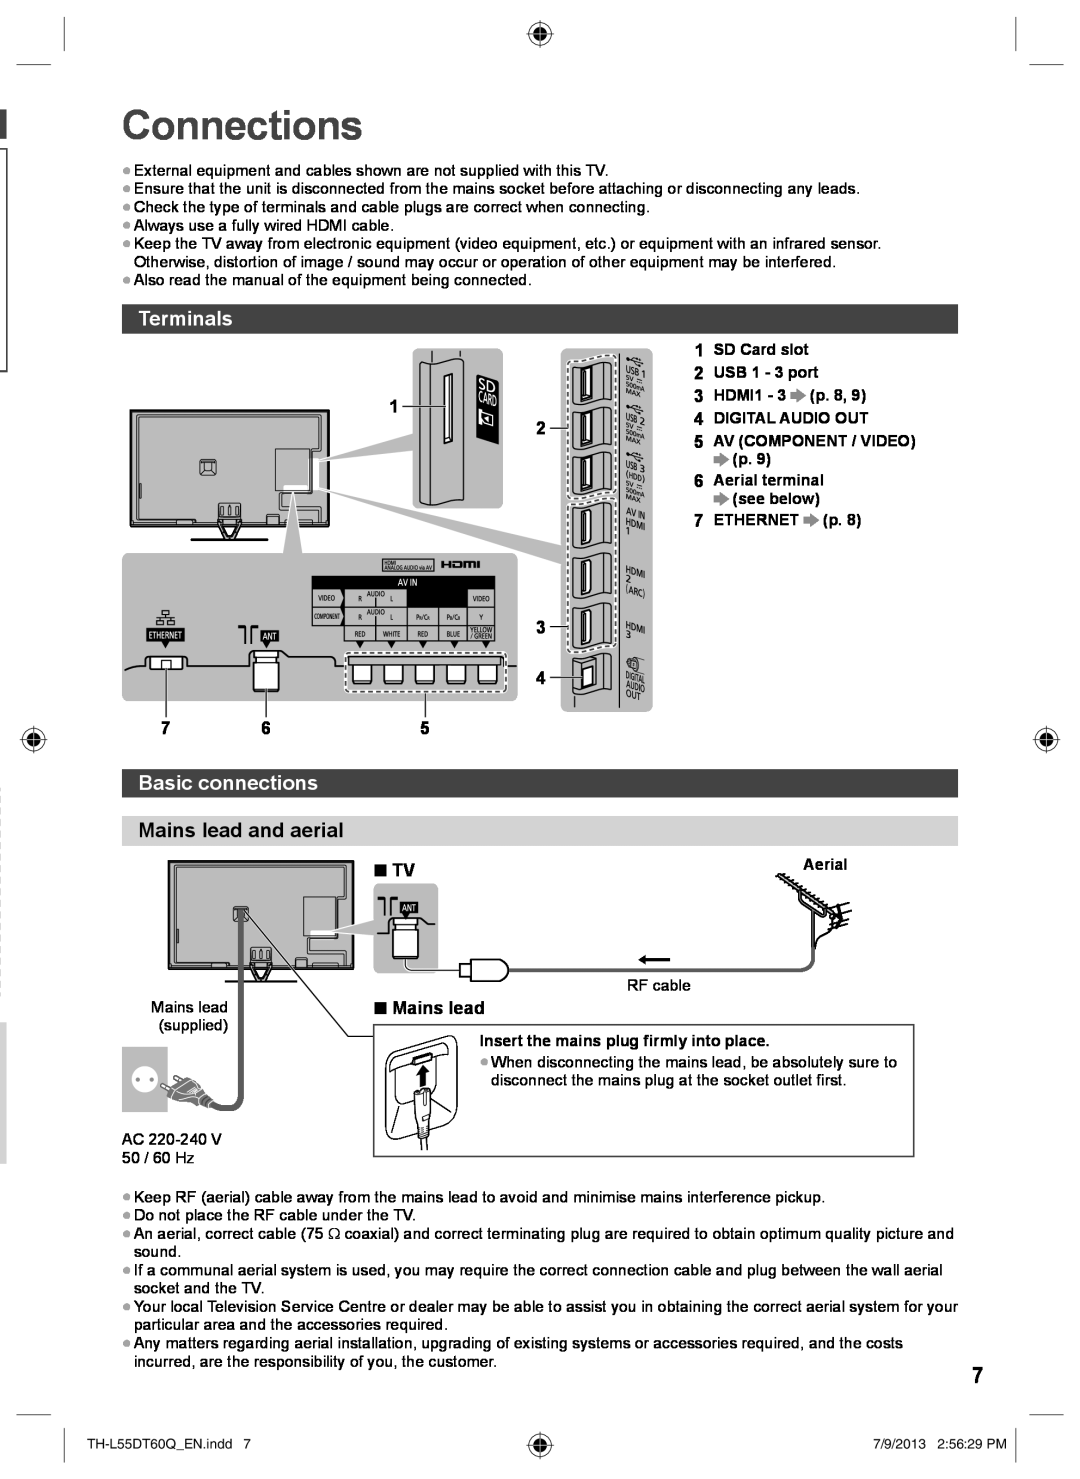 Panasonic TH-L55DT60Q operating instructions Connections, Terminals, Basic connections, Mains lead and aerial 